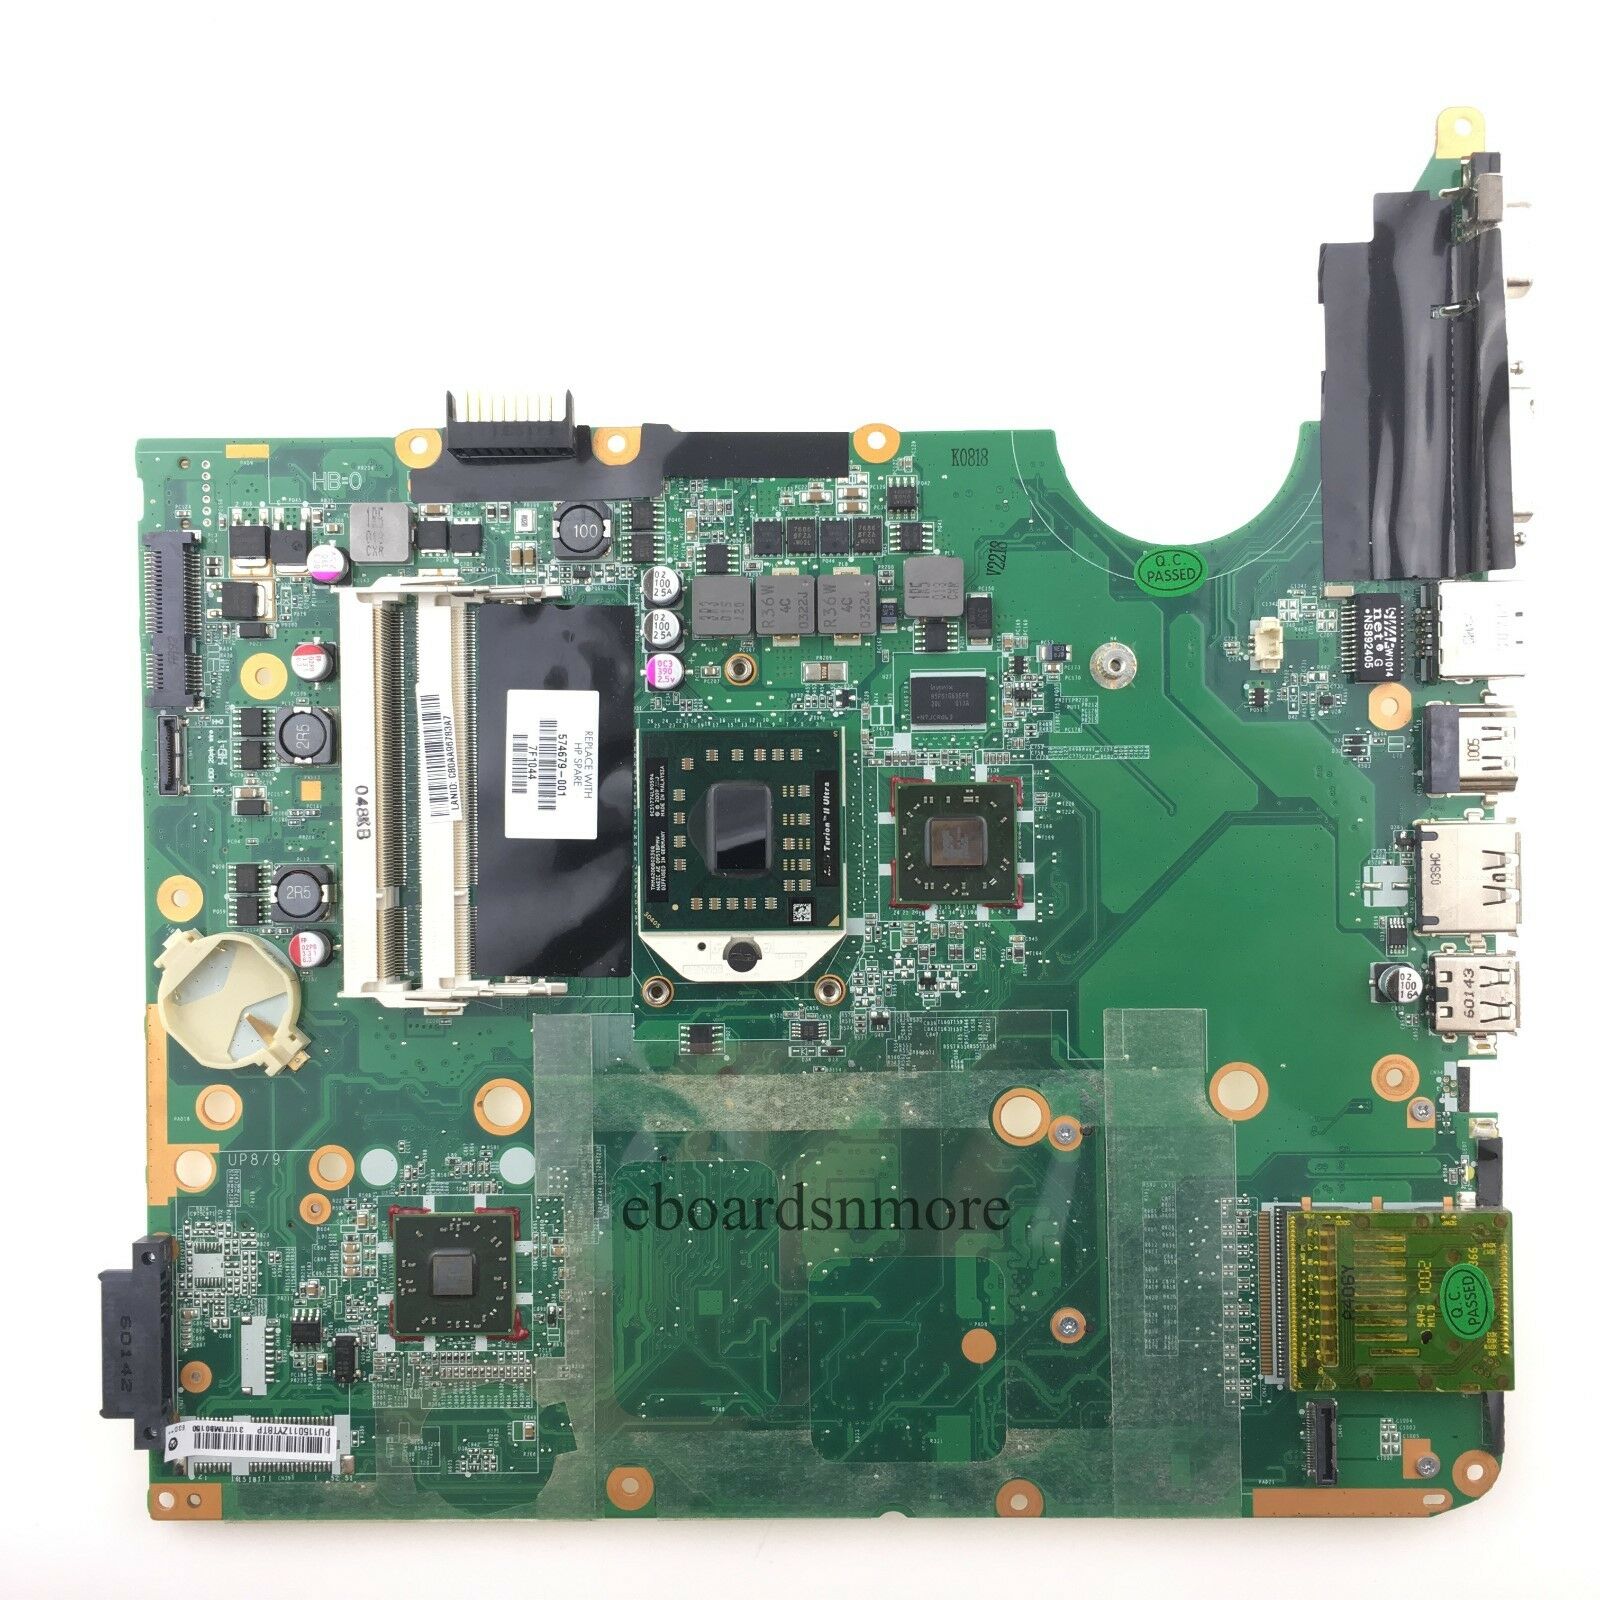 574679-001 AMD MOTHERBOARD for HP PAVILION DV7-3000 Series ATI Radeon HD4250 EXC Brand: HP Bundle Listing: - Click Image to Close